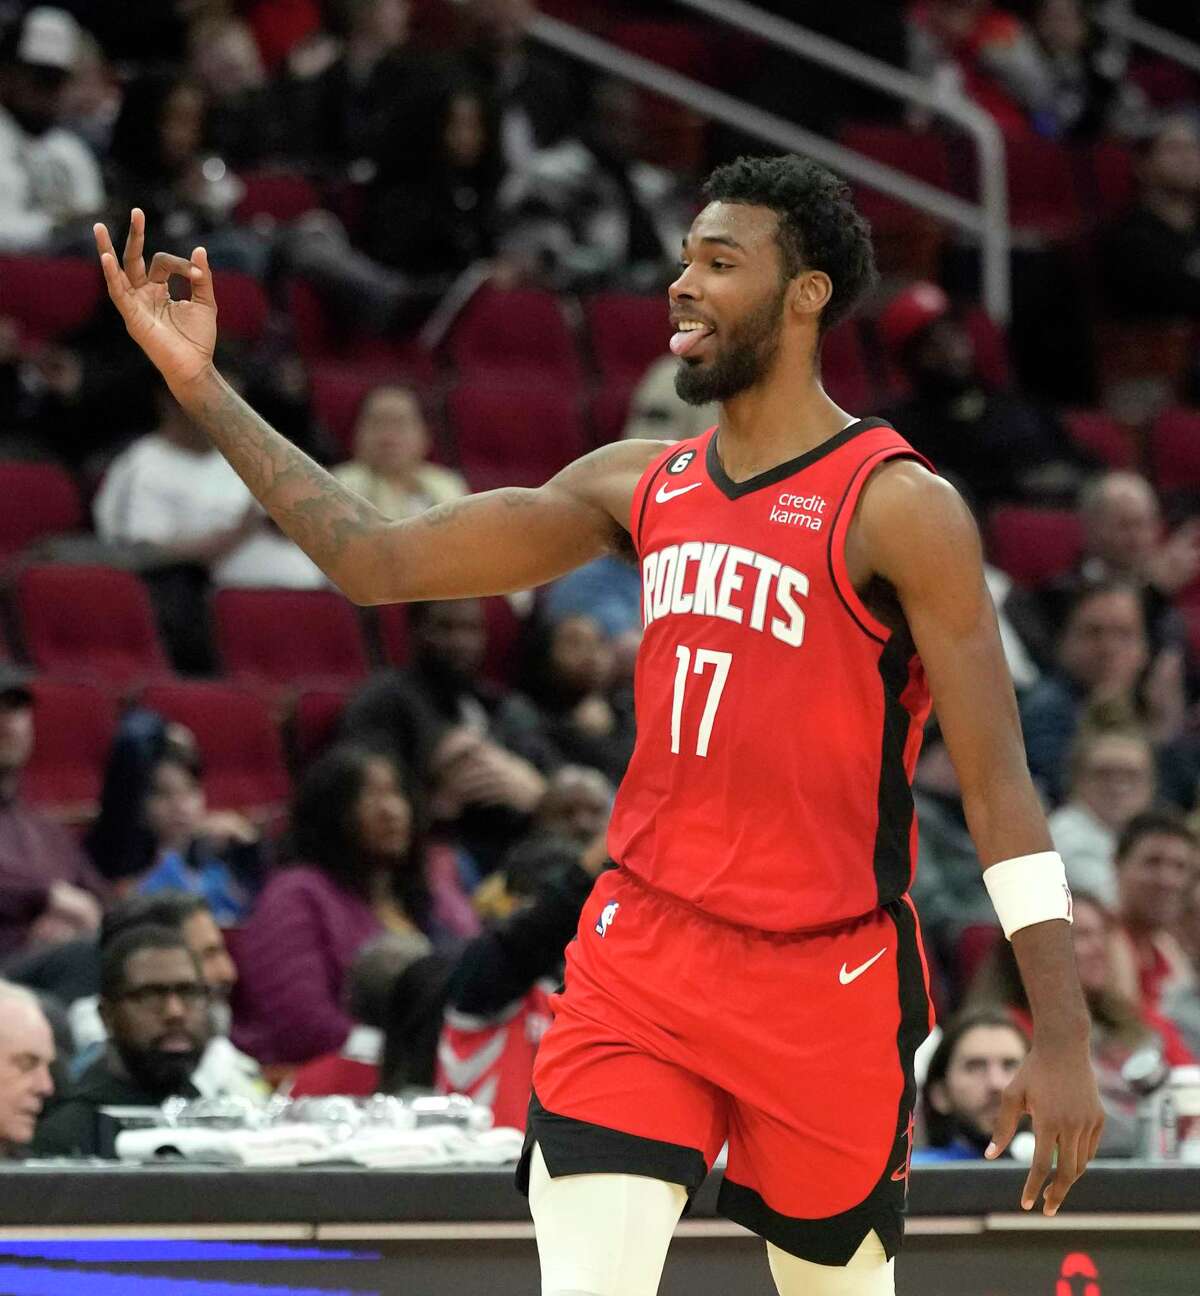 Tari Eason notched a career-high 20 points while being a menace on the boards during the Rockets' win over the Thunder on Wednesday.